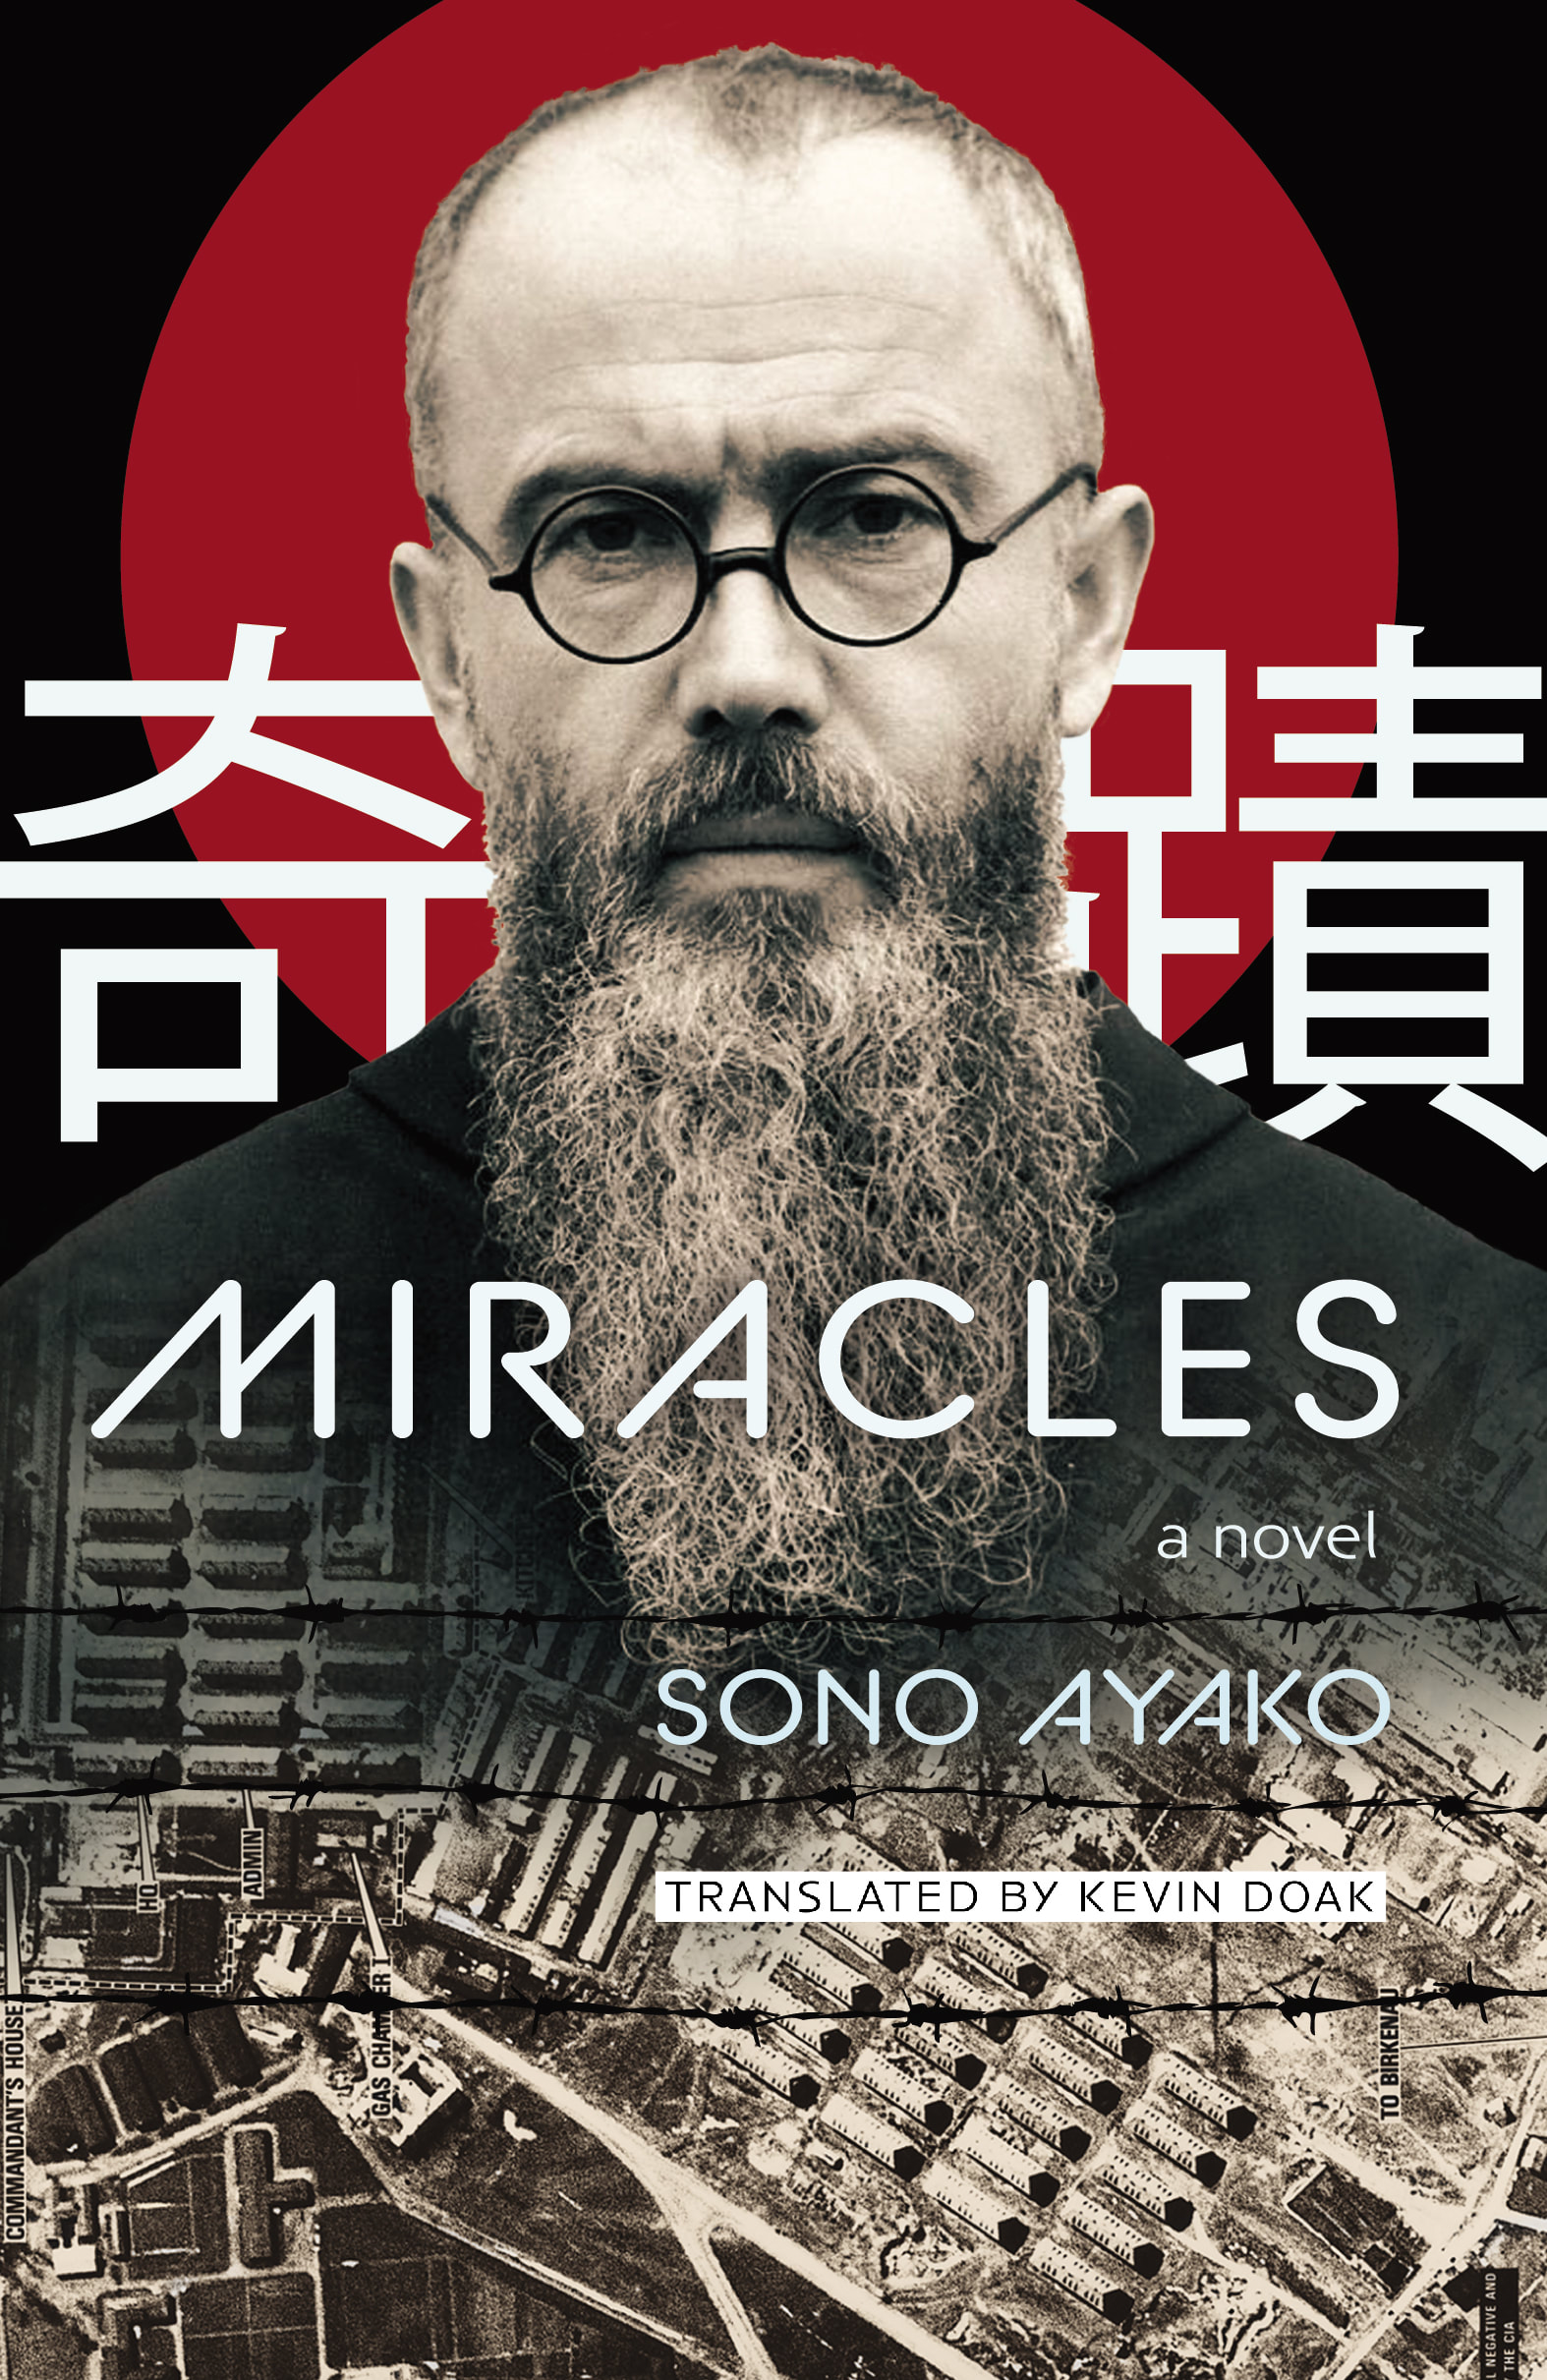 Miracles by Sono Ayako